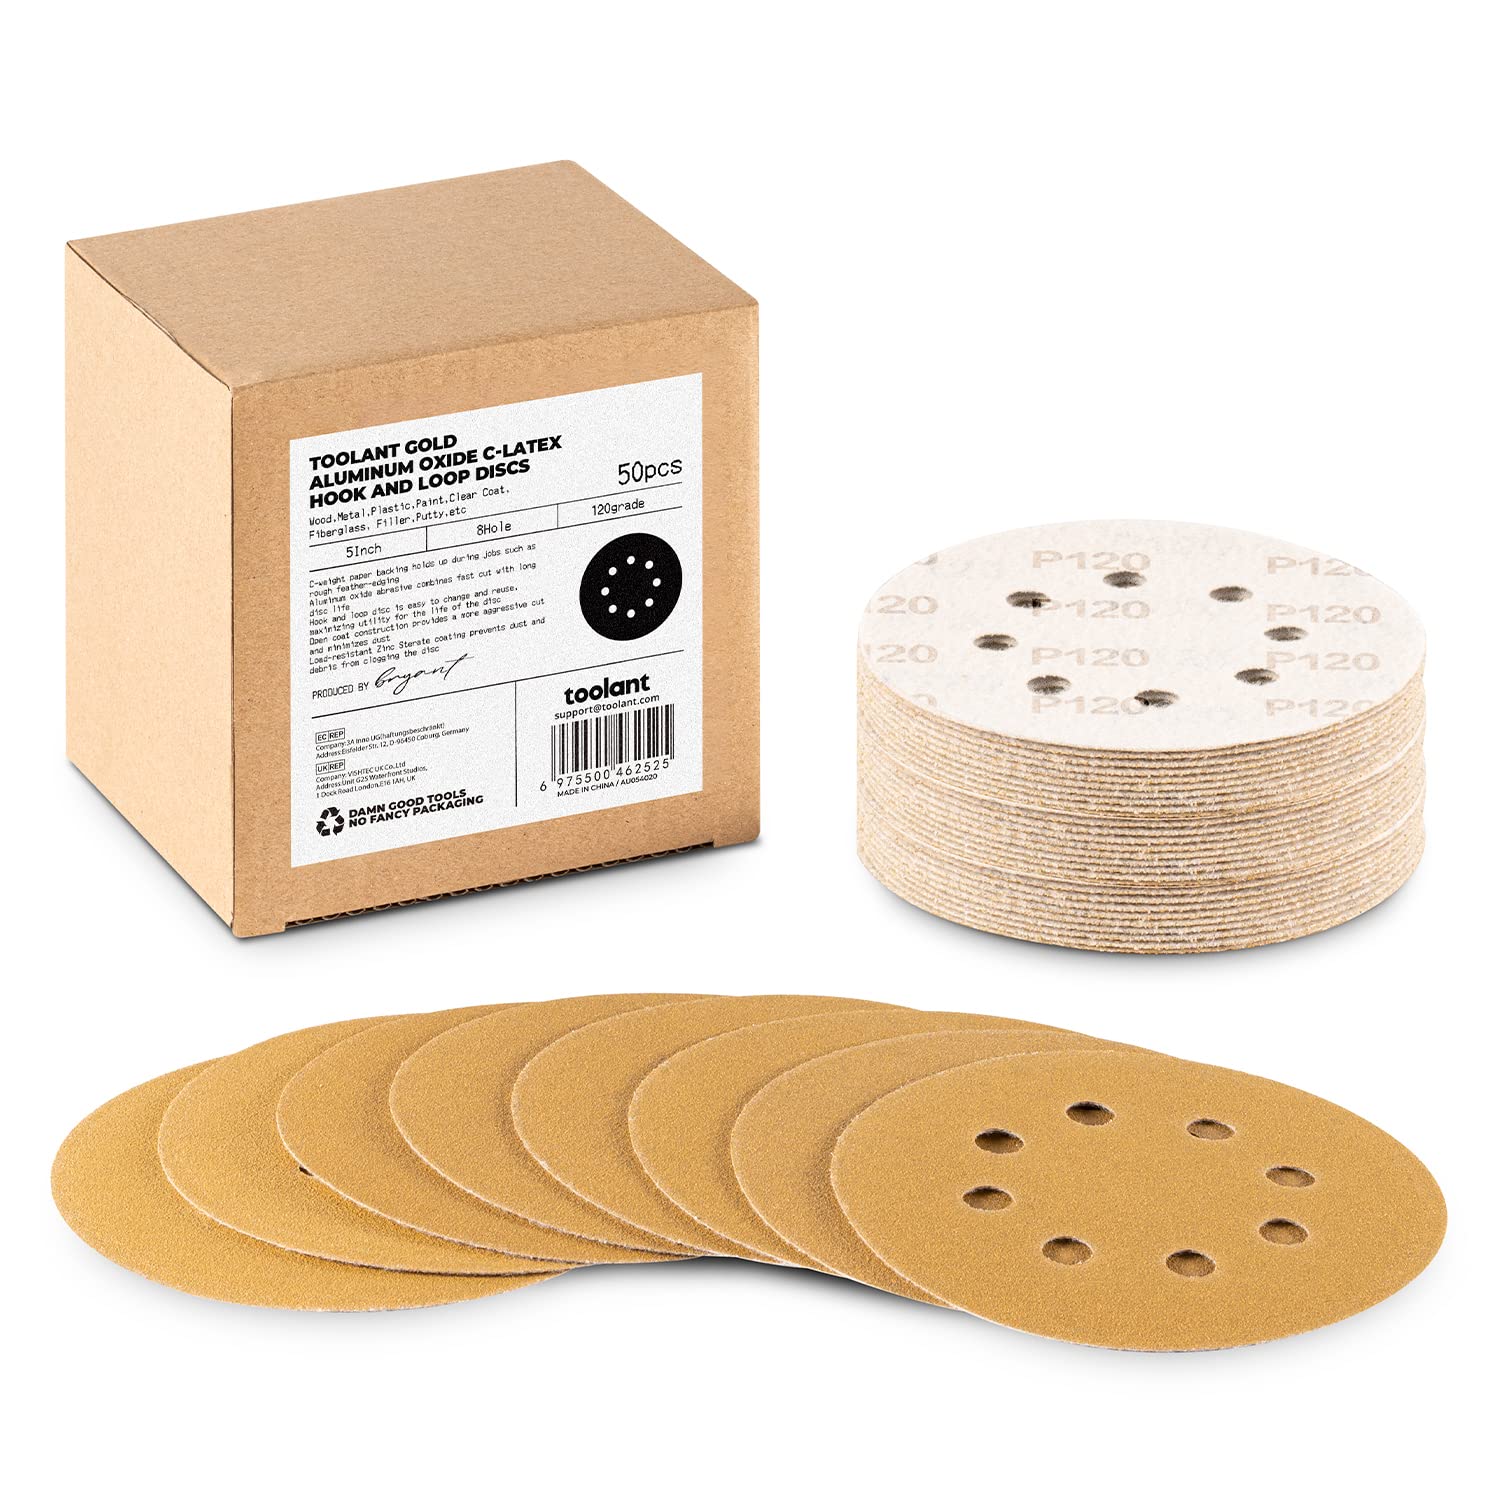 5 inch 8 Hole Sanding Discs Hook and Loop, 60-800 Grit, for Wood and Metal Sanding